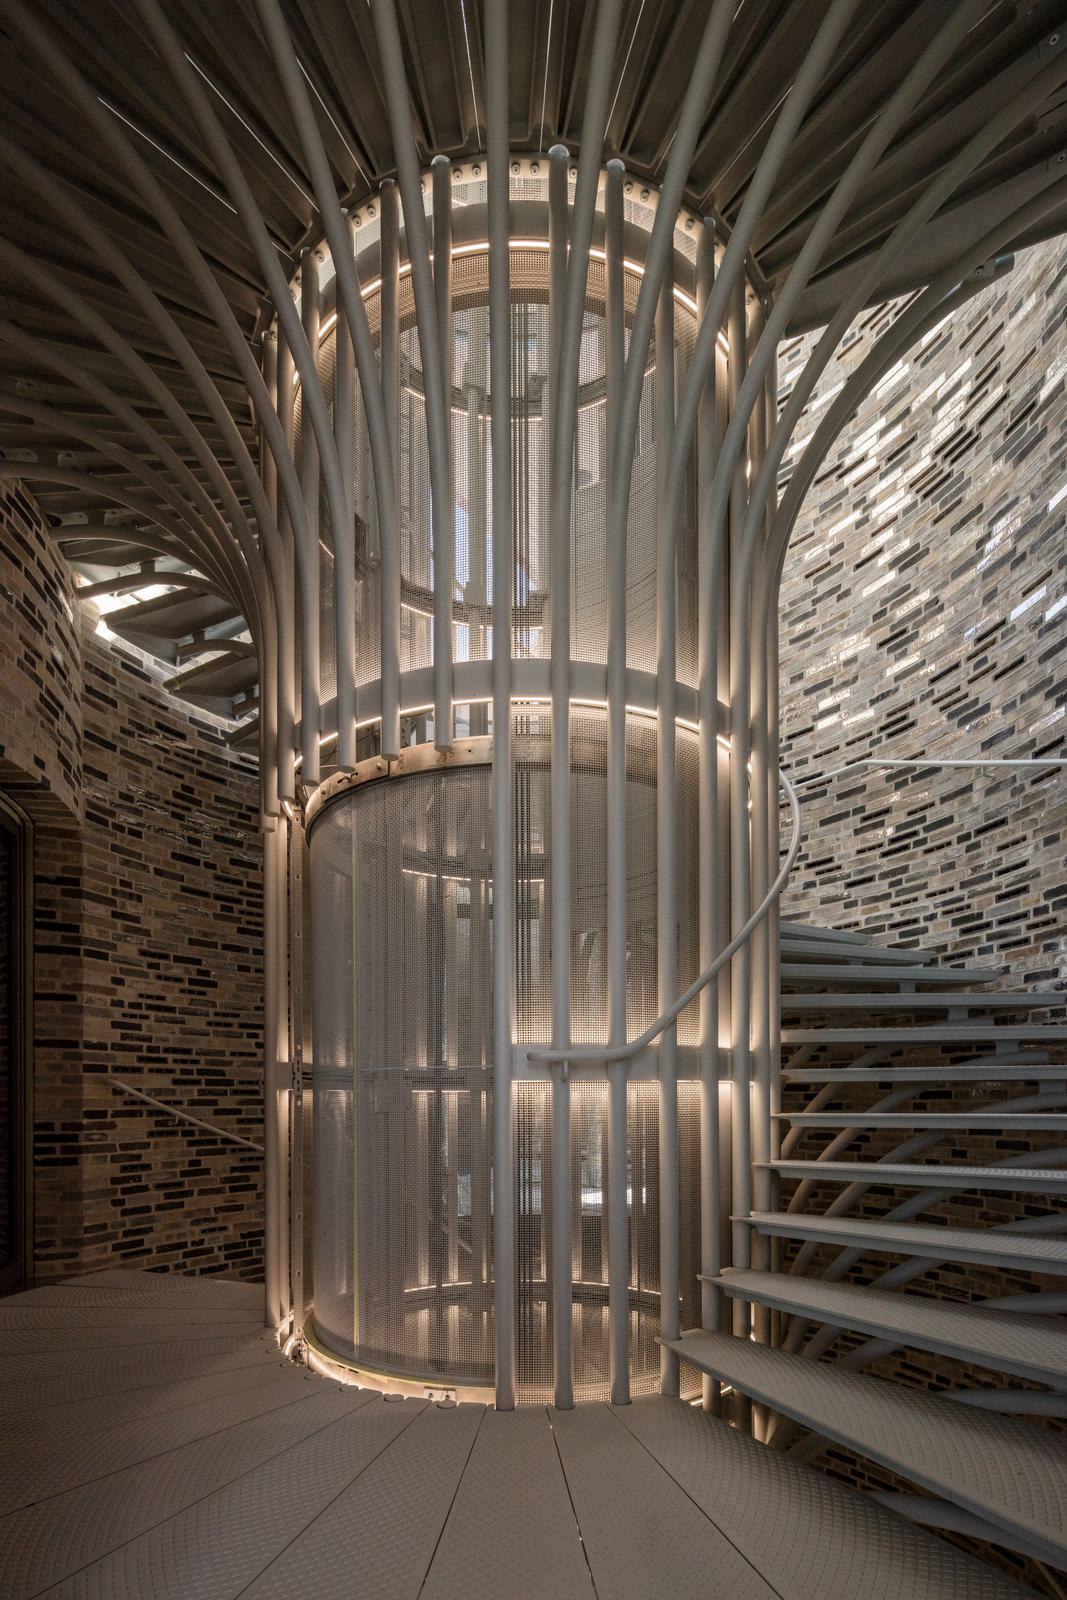 The cavernous structure also features a built-in elevator and spiral staircase. / Photo by Anders Sune Berg